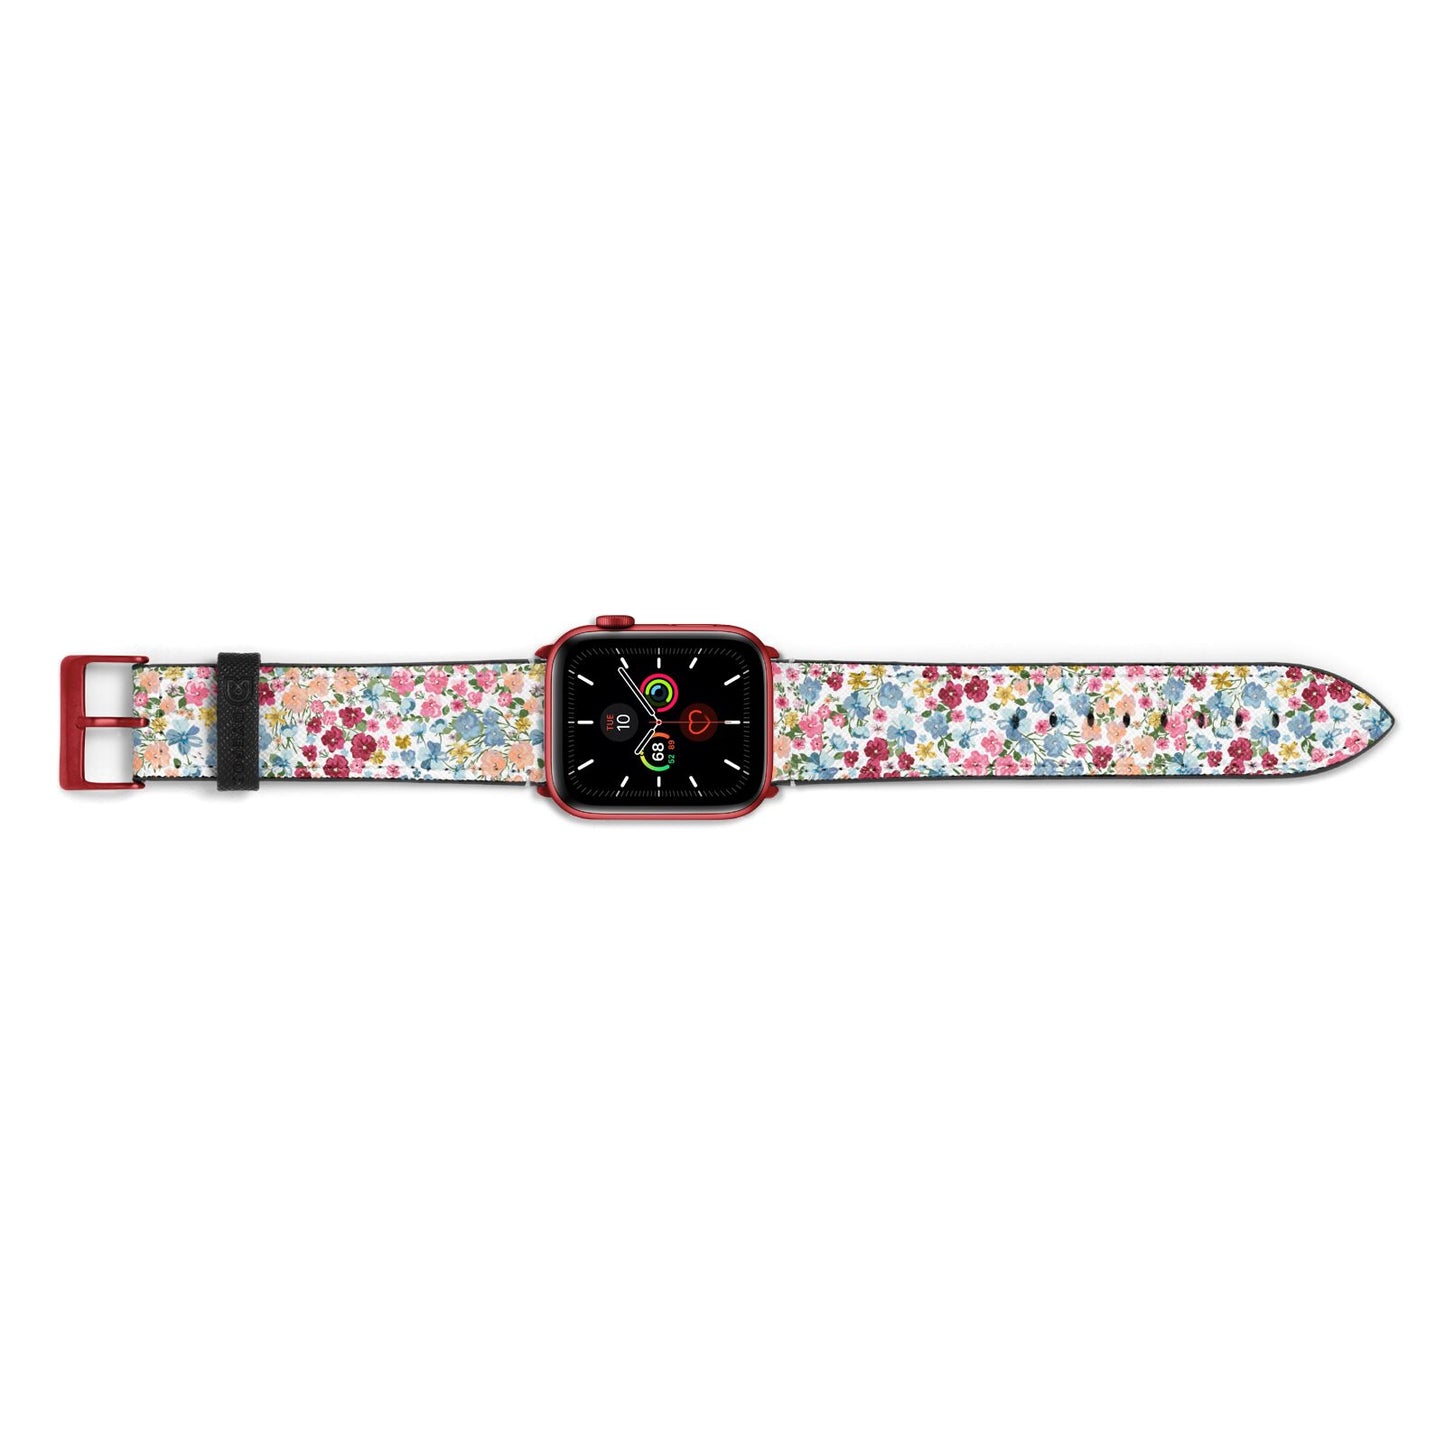 Floral Meadow Apple Watch Strap Landscape Image Red Hardware